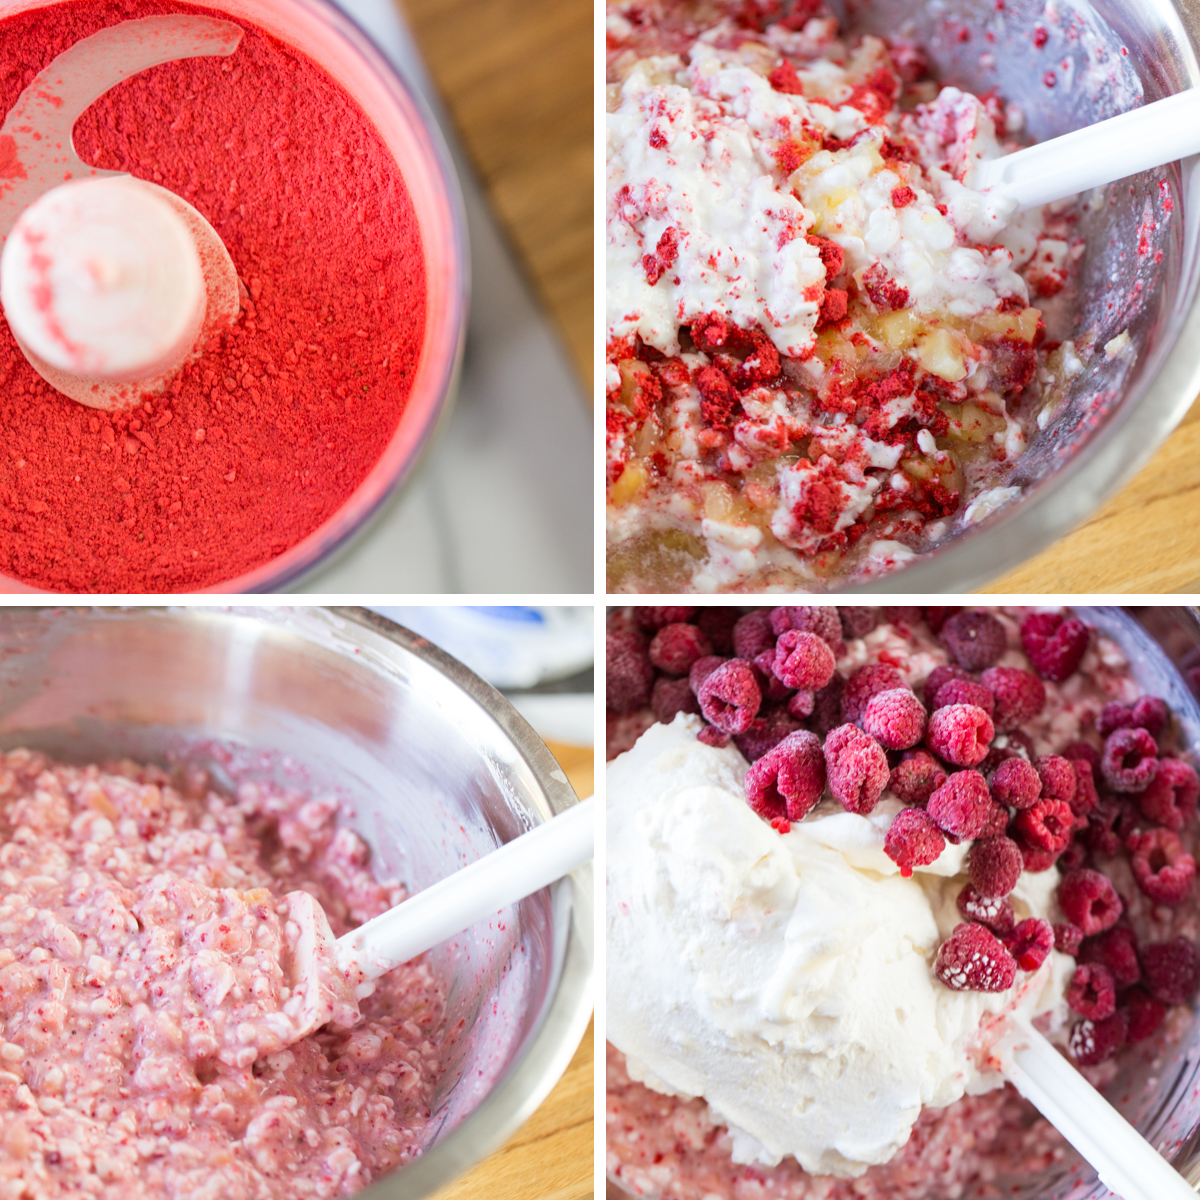 Step by step photos for making Very Berry Fluffy Salad